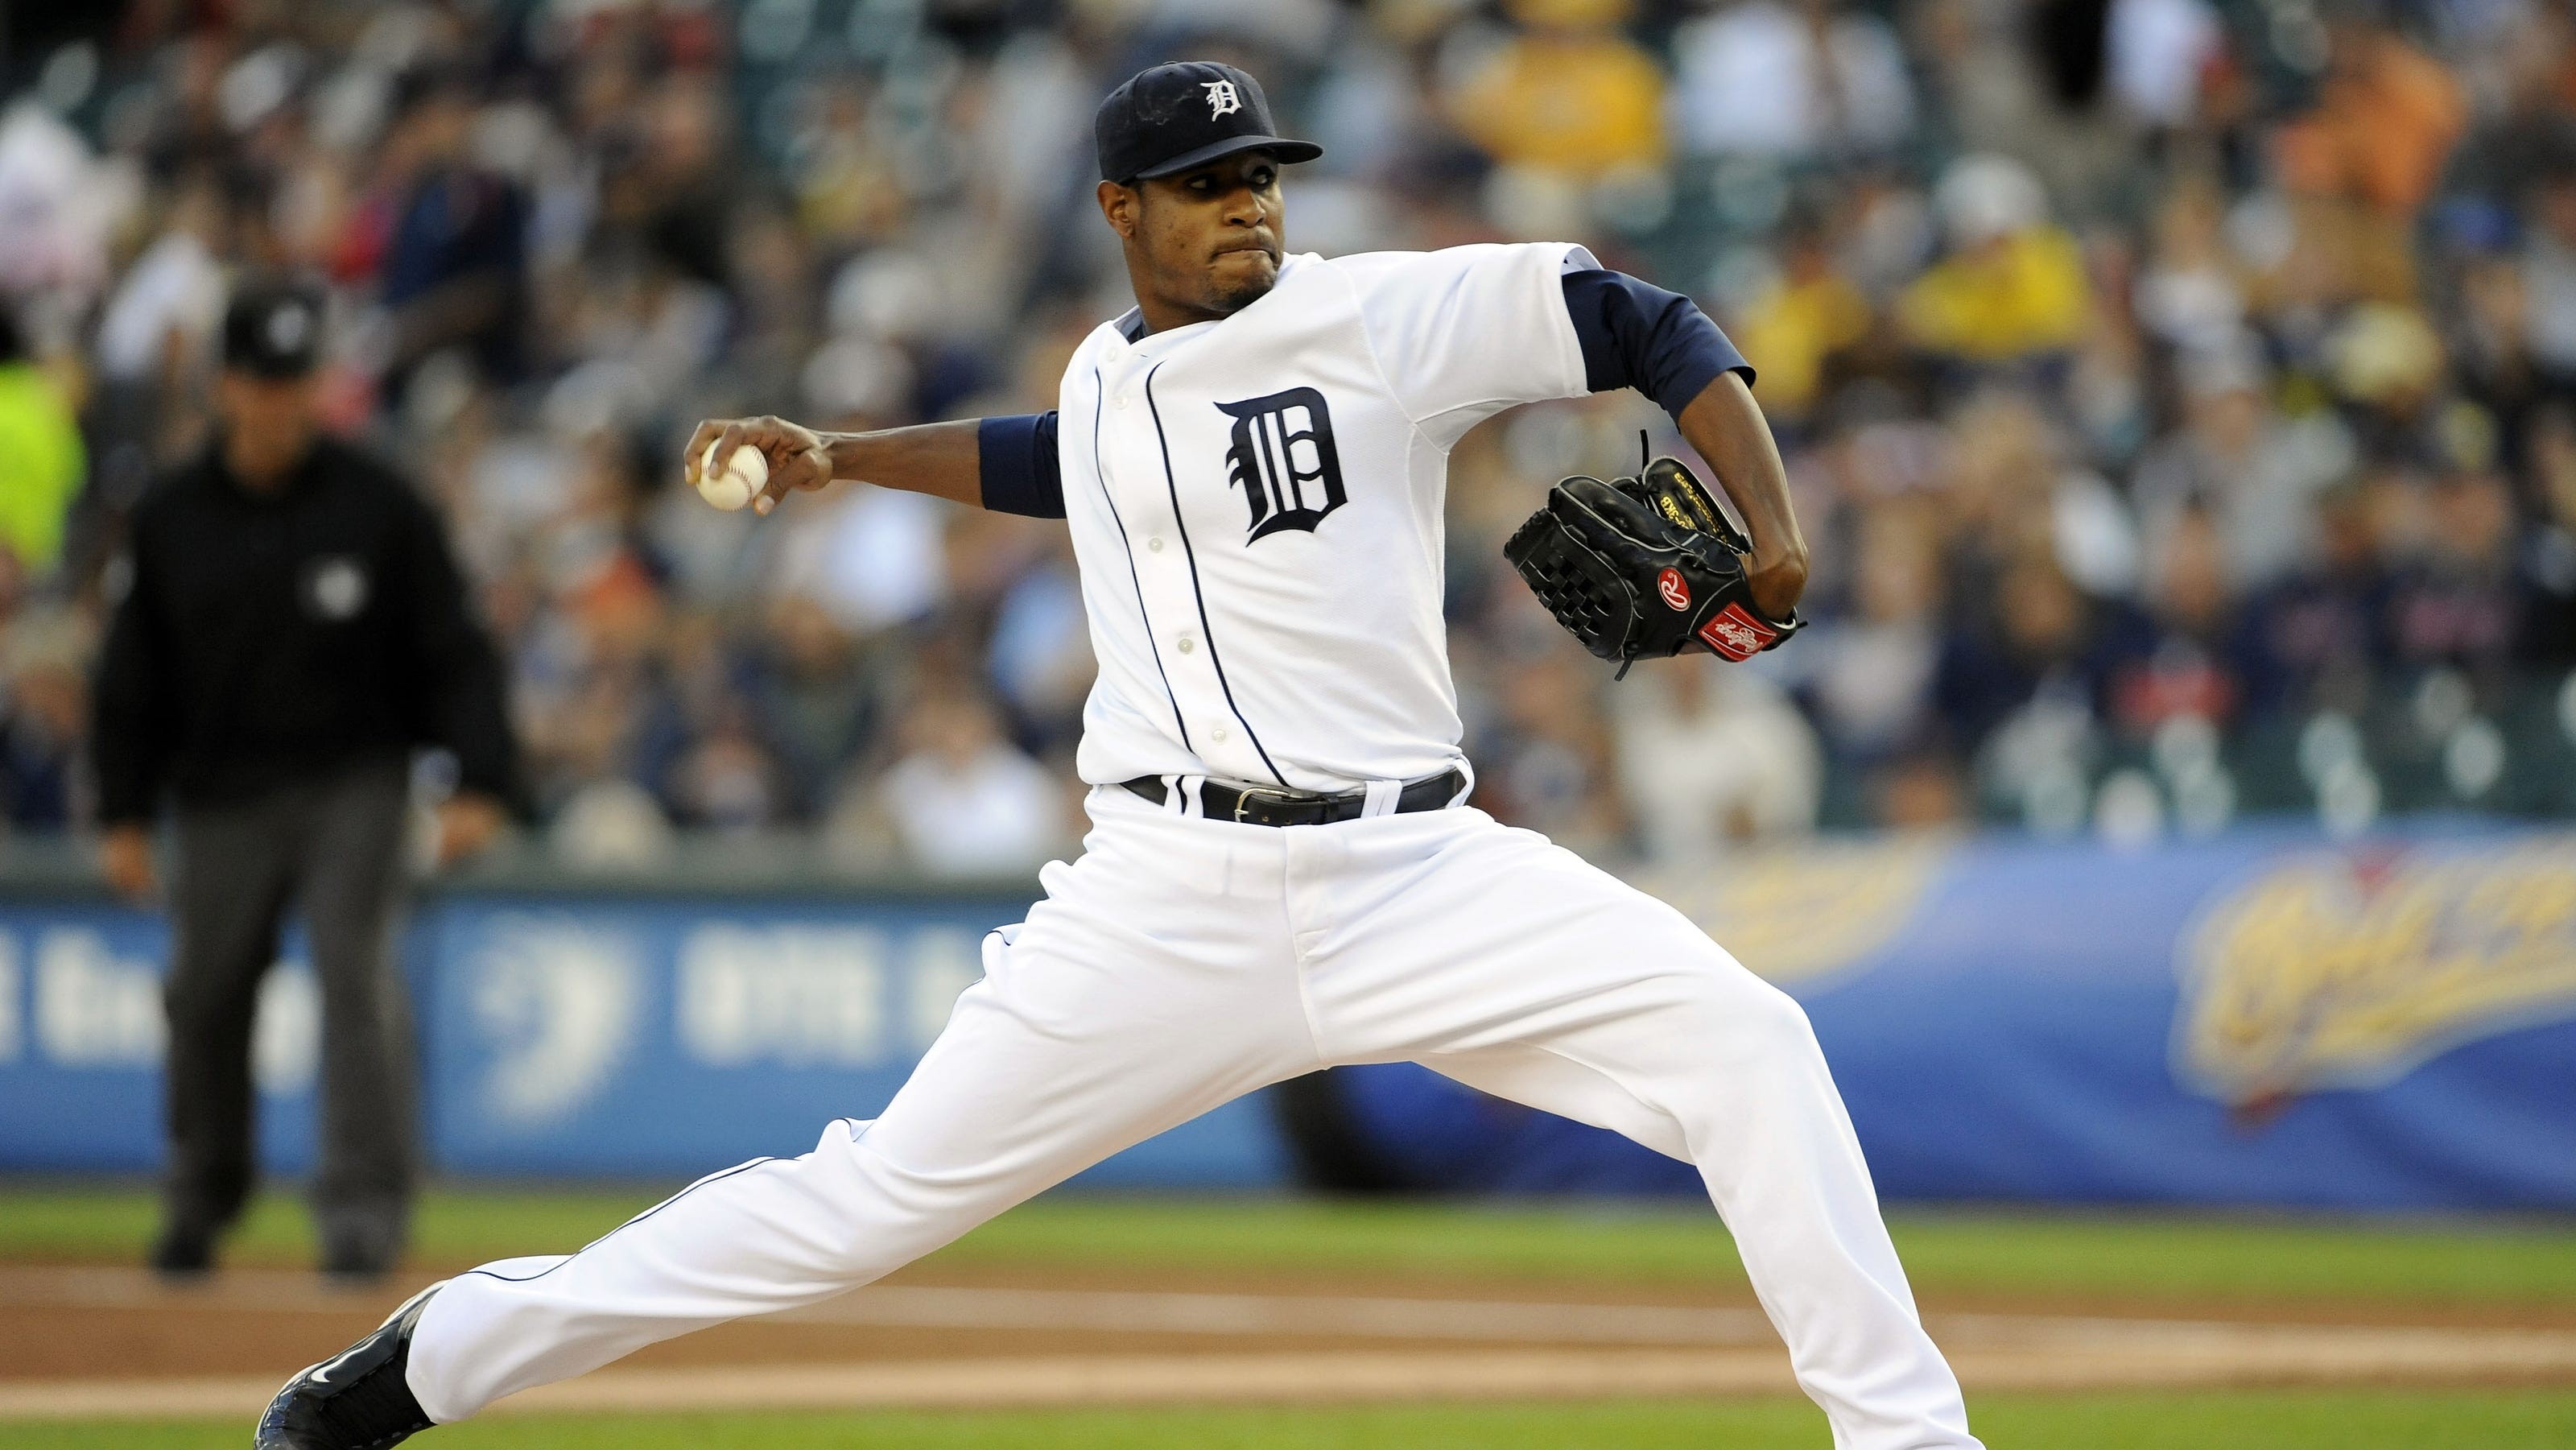 Former Tiger Edwin Jackson, who pitched for record 14 MLB teams, retires